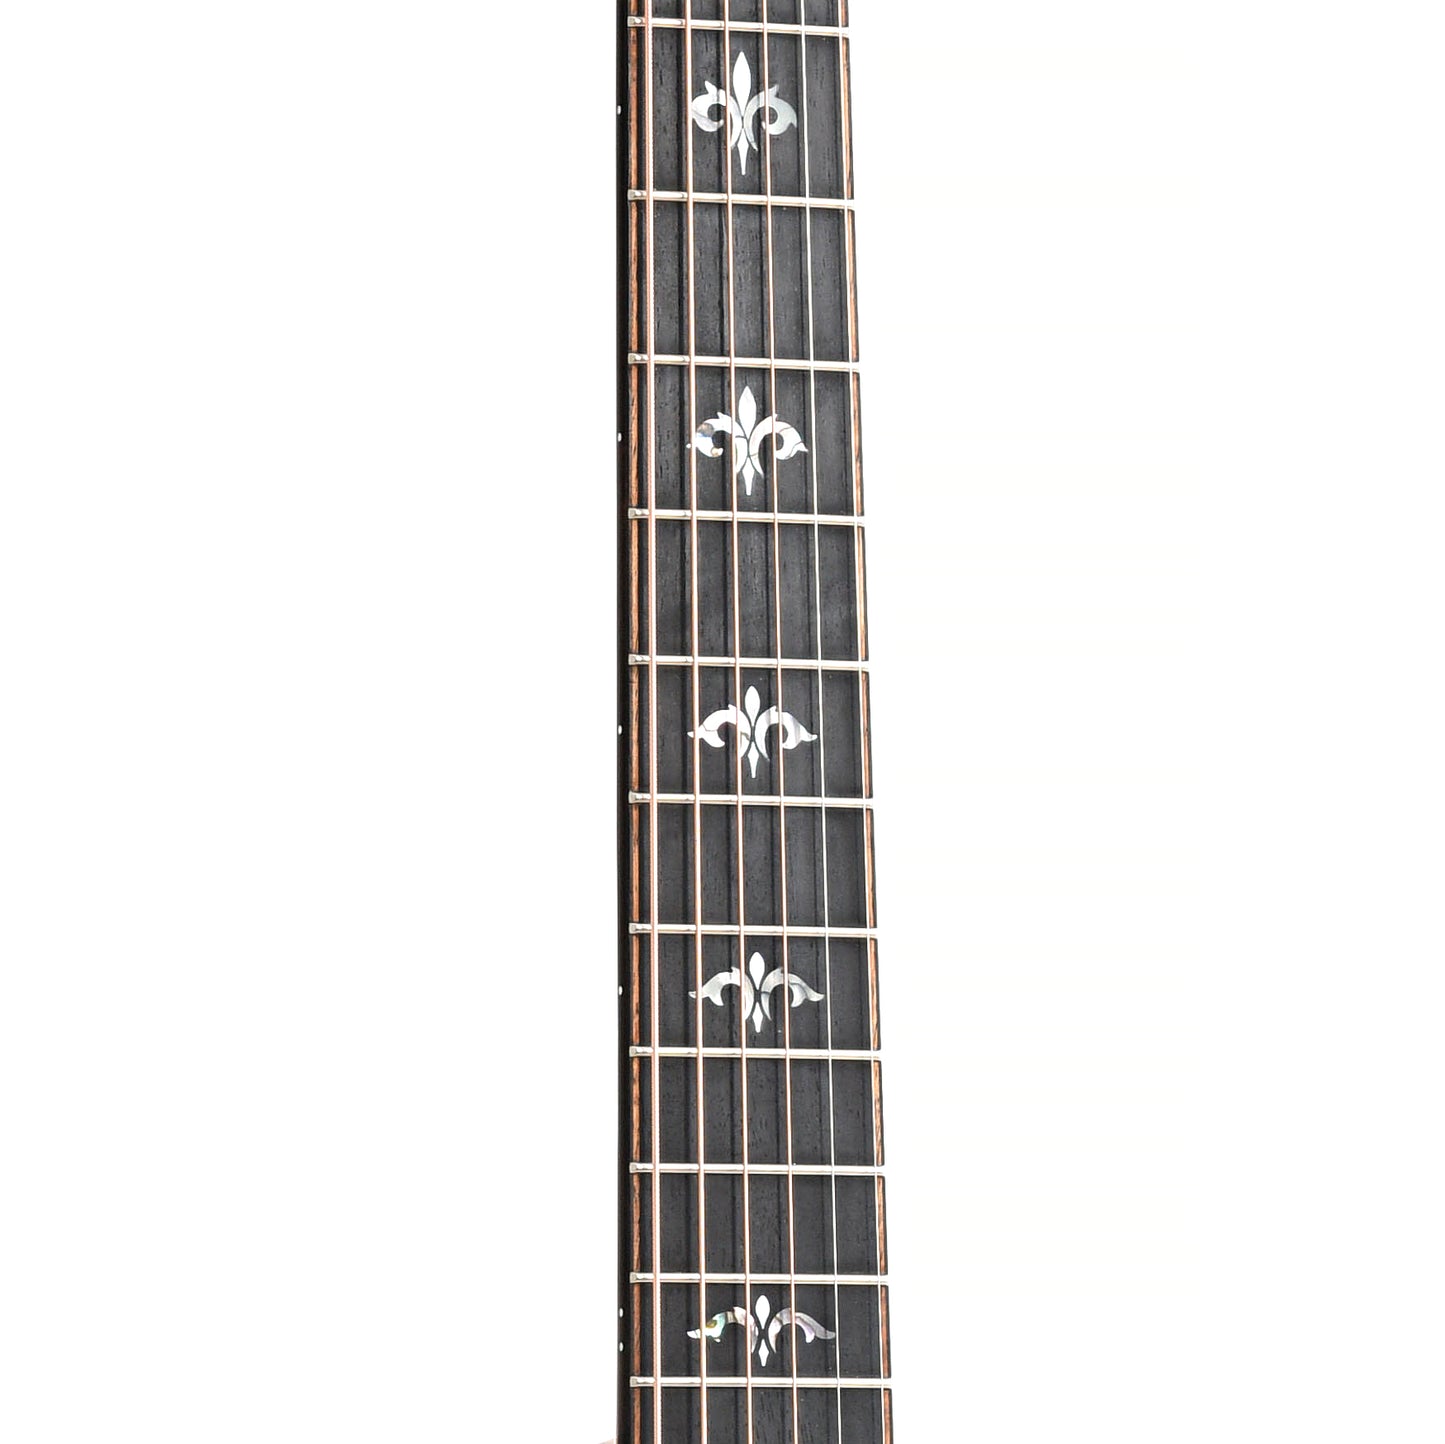 Fretboard of Taylor 914ce Acoustic Guitar